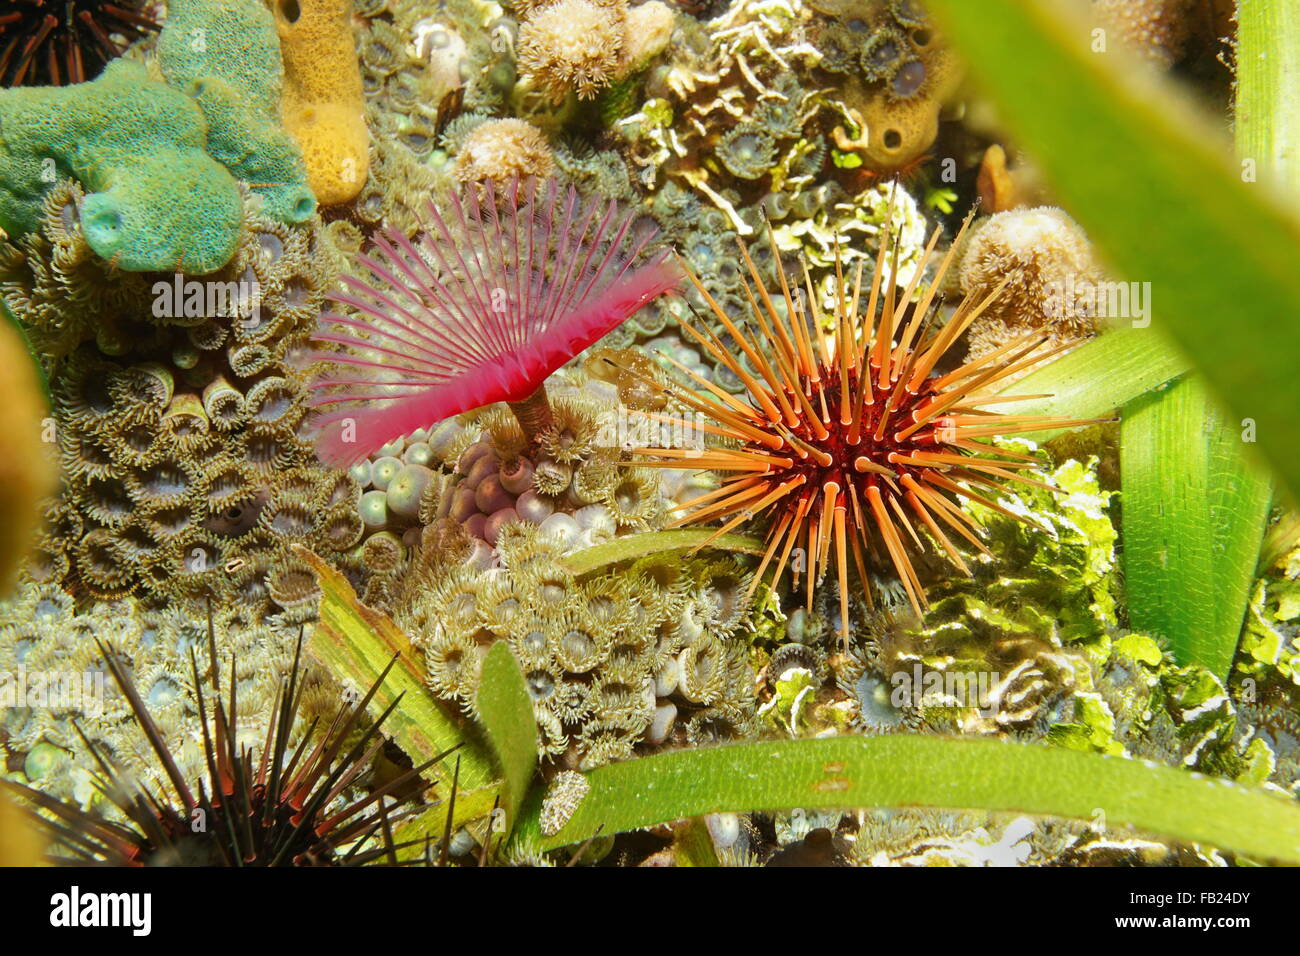 Sea life on the seabed, reef urchin with split-crown feather duster worm and mat zoanthid, Caribbean sea, Central America Stock Photo